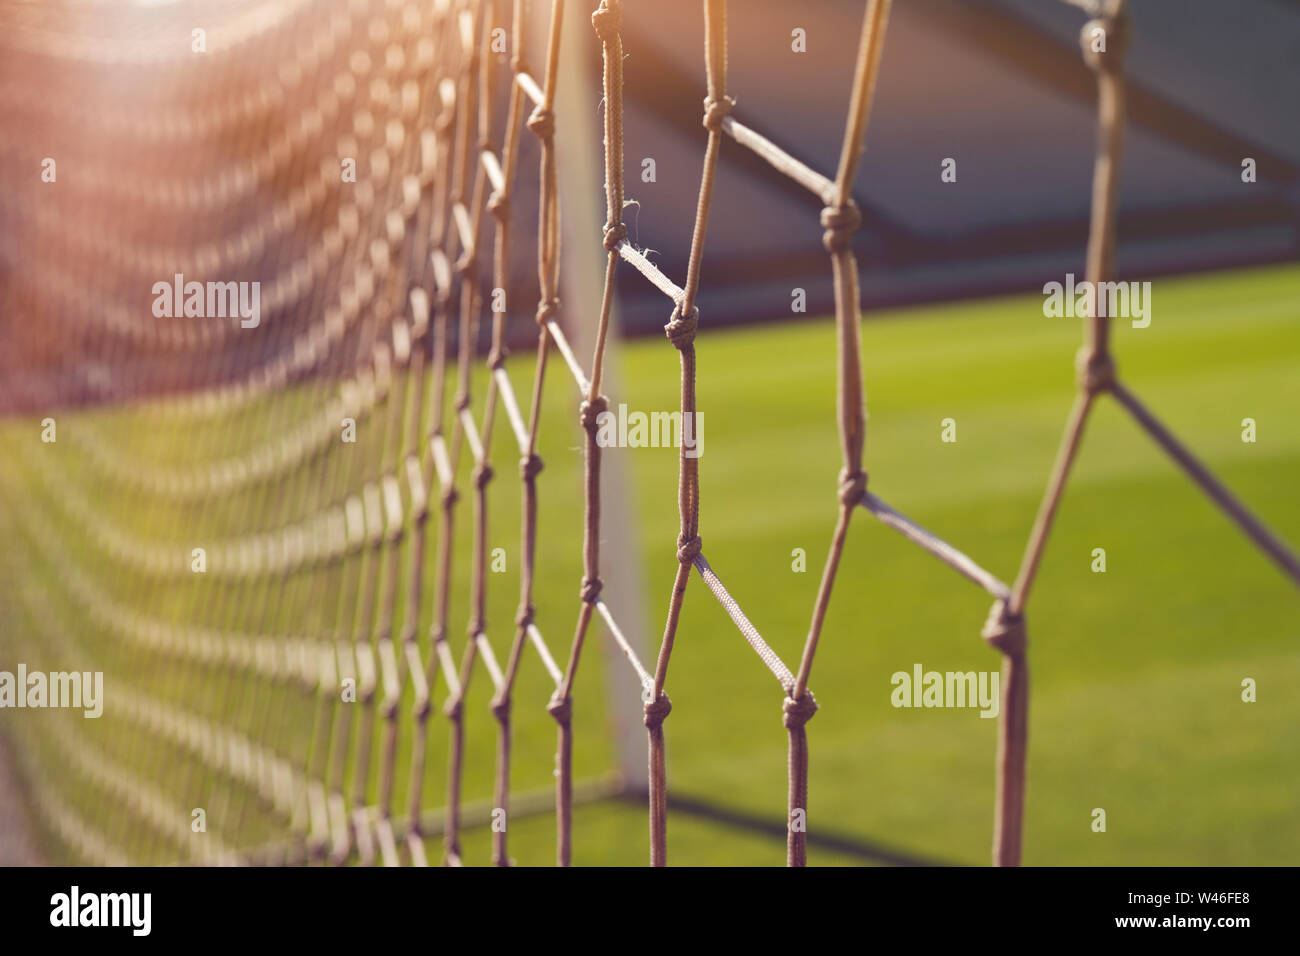 The net in Artificial turf at sunset. Stock Photo